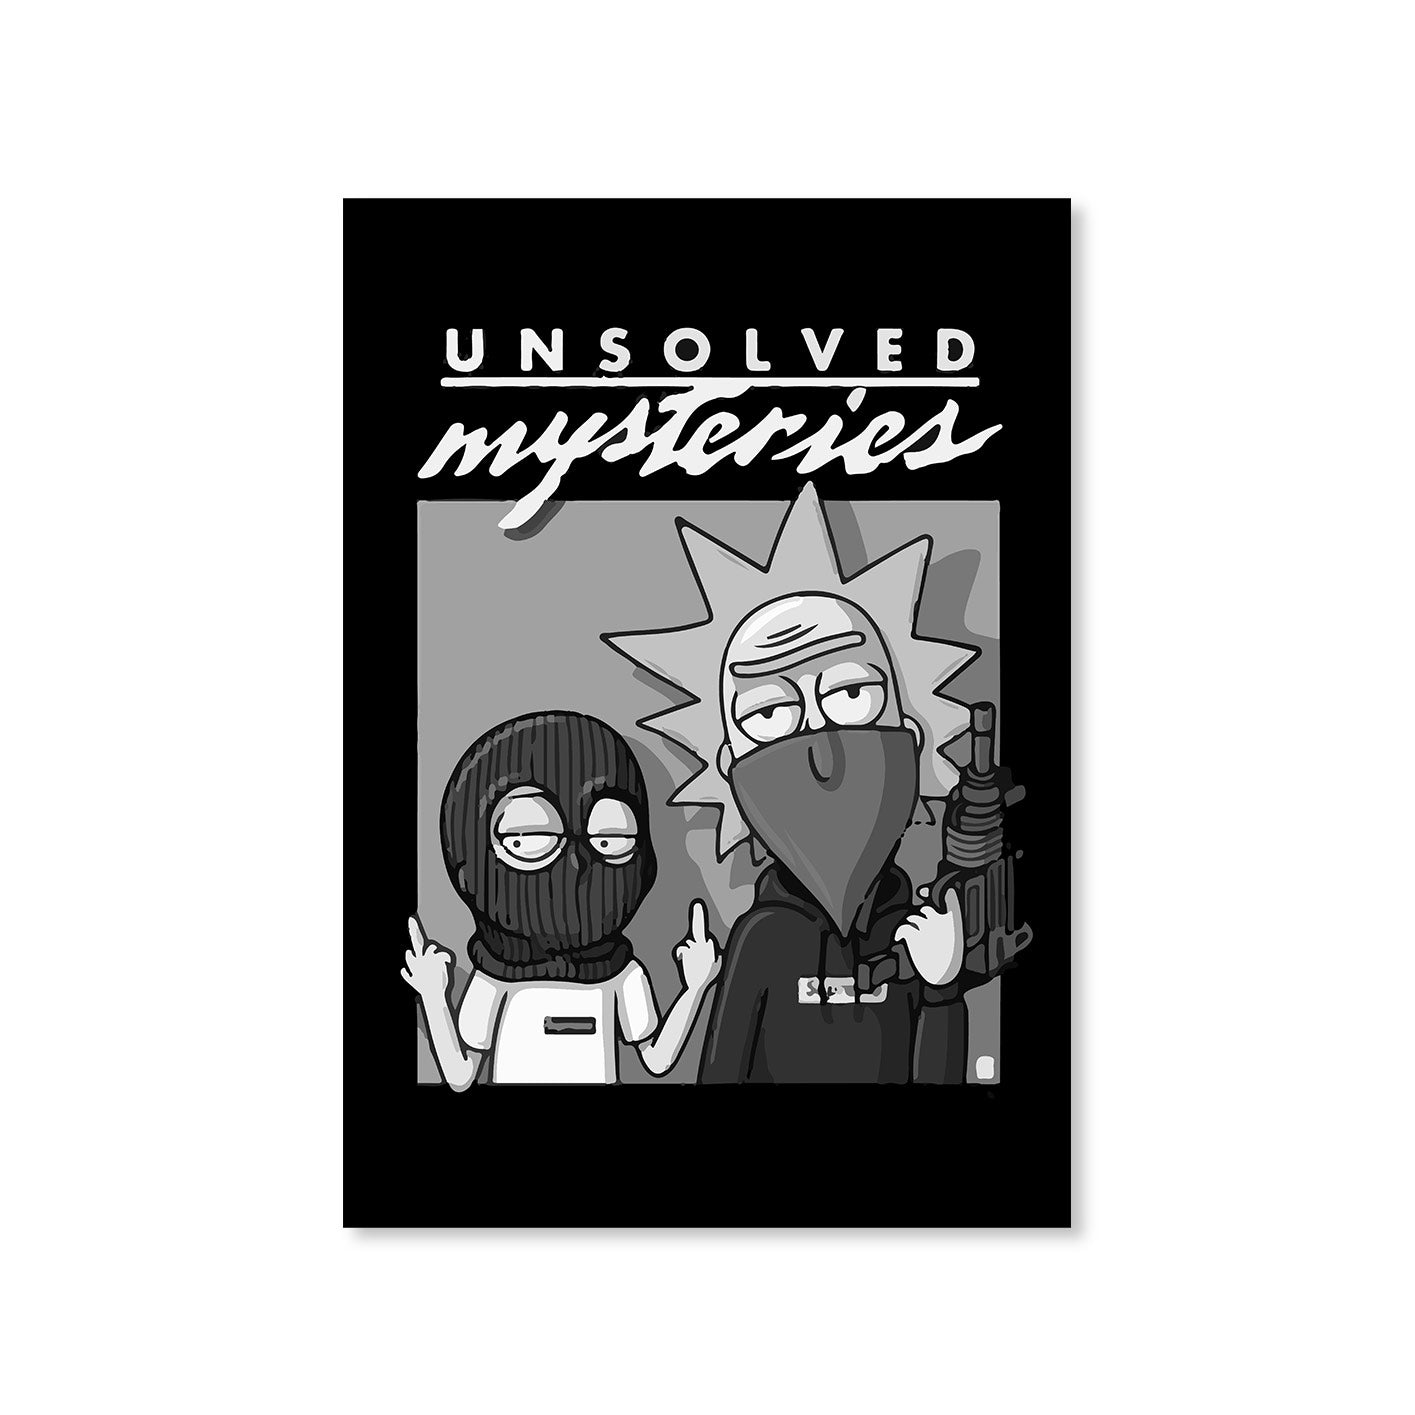 rick and morty unsolved mysteries poster wall art buy online india the banyan tee tbt a4 rick and morty online summer beth mr meeseeks jerry quote vector art clothing accessories merchandise